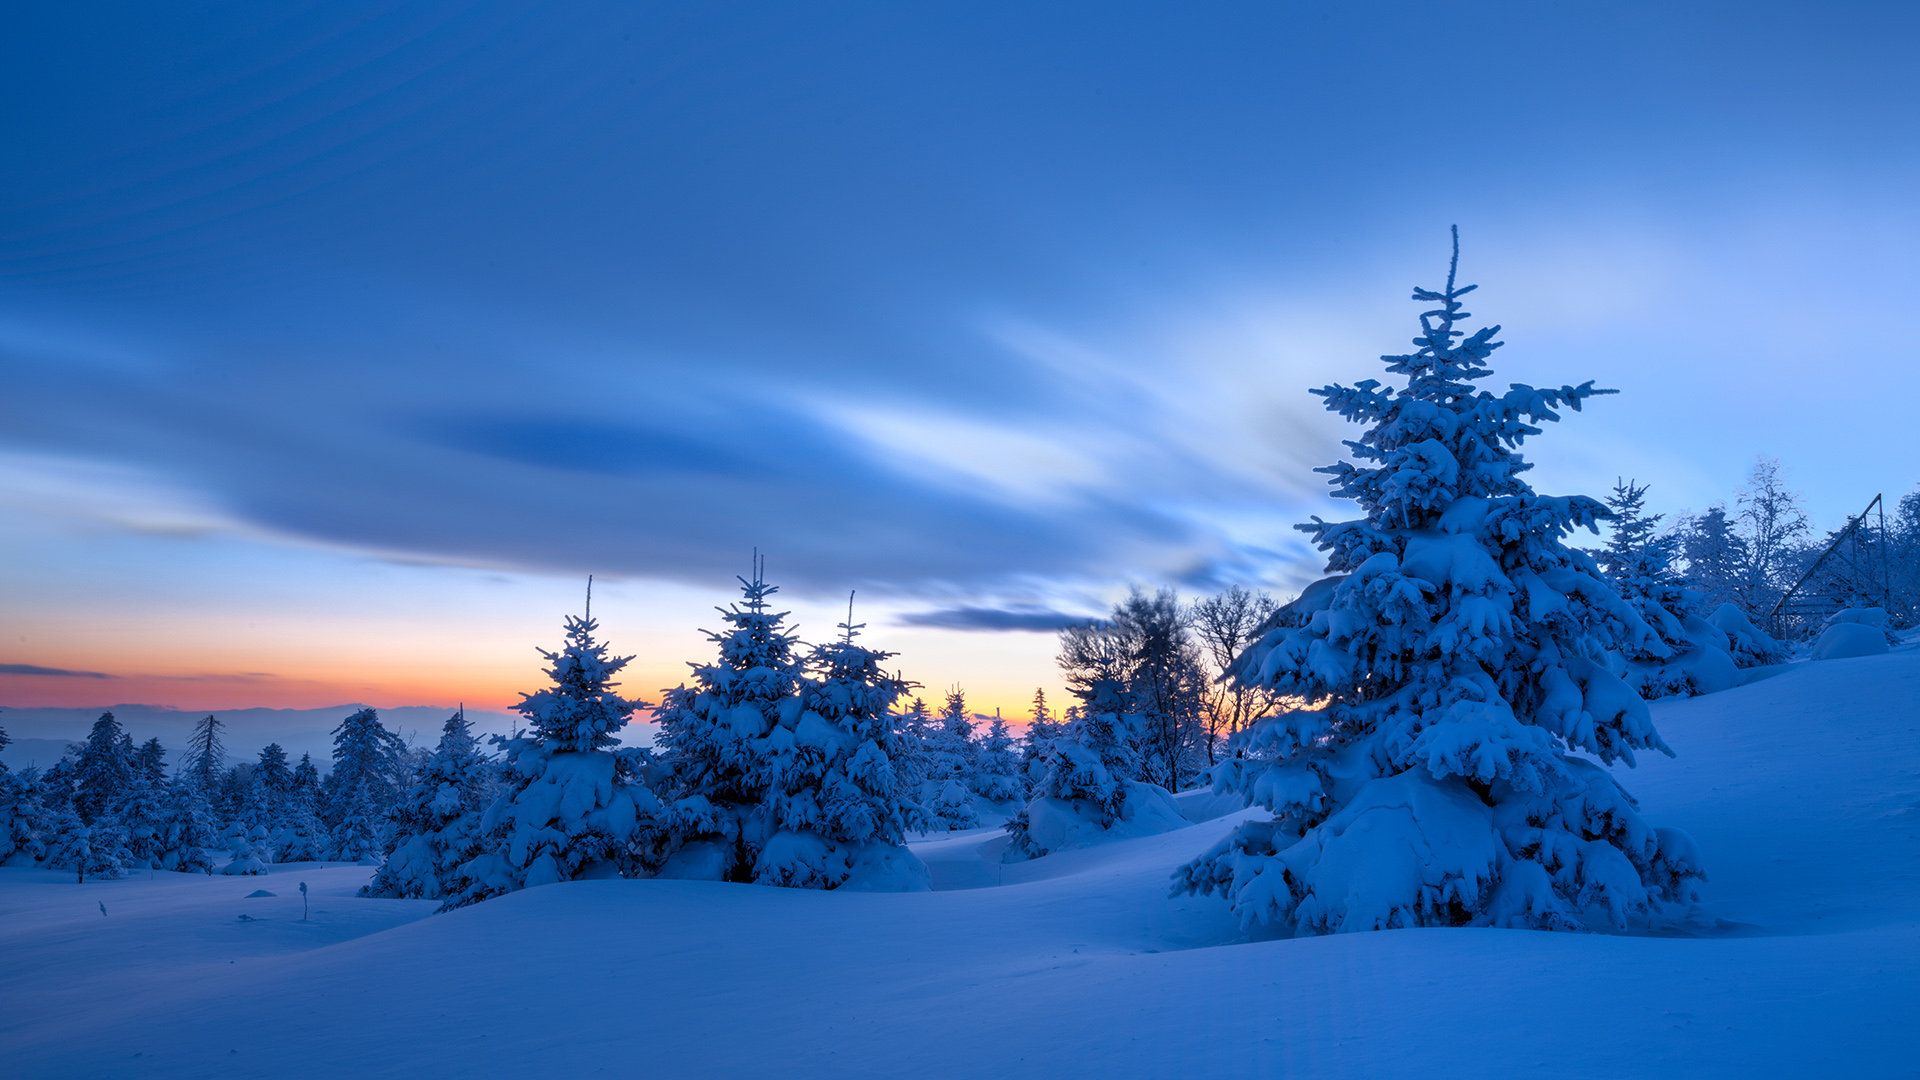 Snow Clouds Sky Sunset Mountains Trees Spruce Winter China Nature Landscape 1920x1080